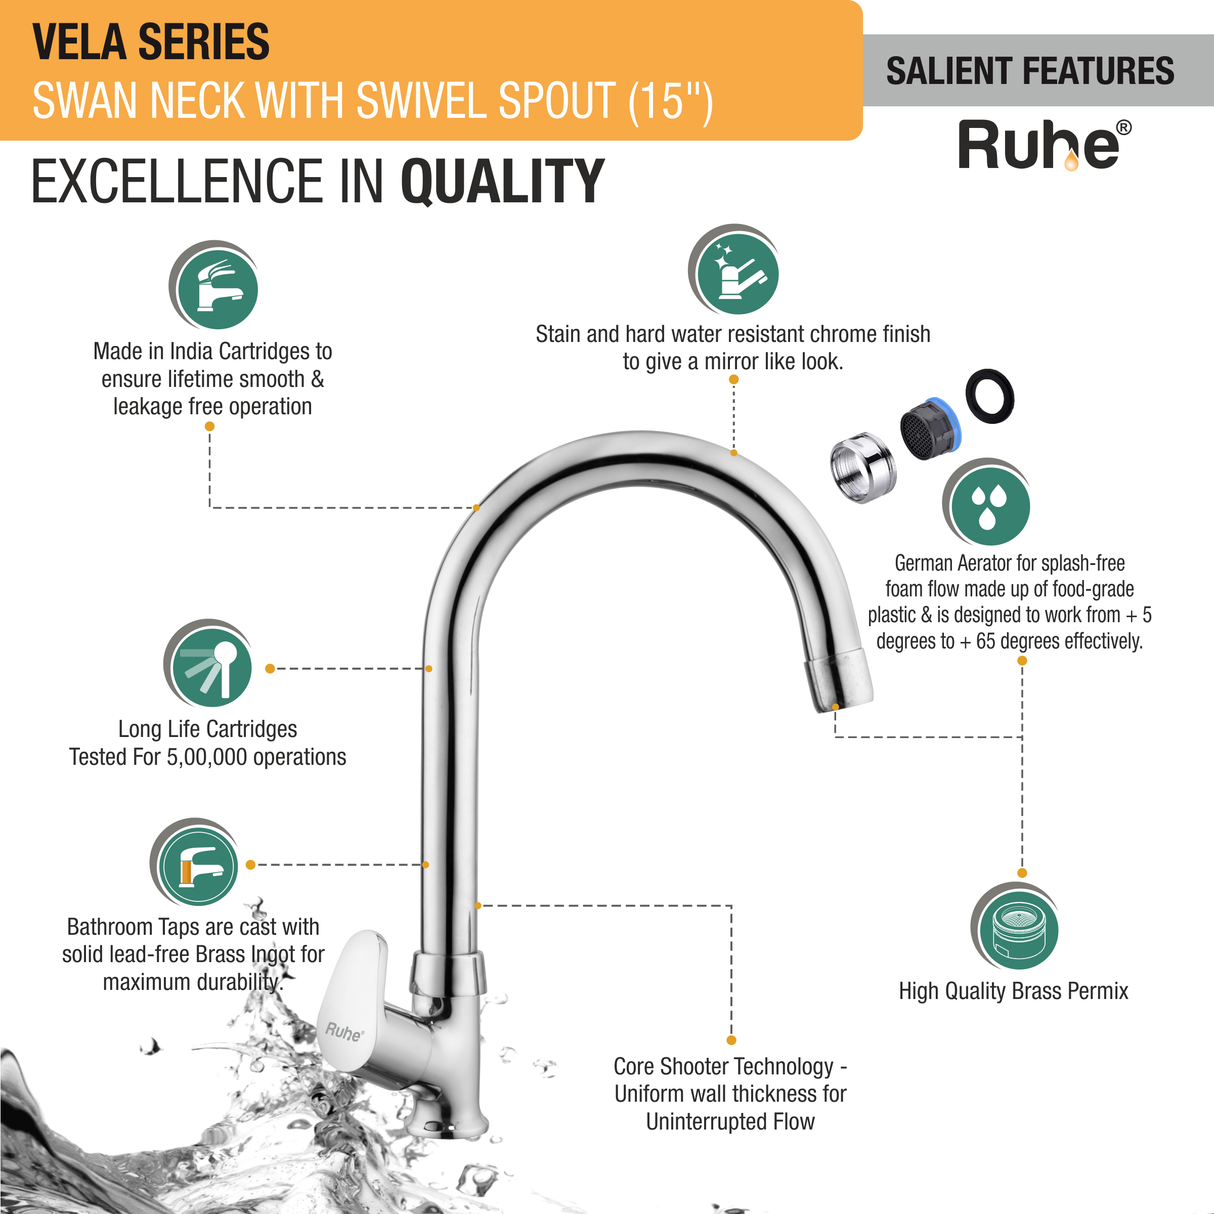 Vela Swan Neck with Medium (15 inches) Round Swivel Spout Faucet features